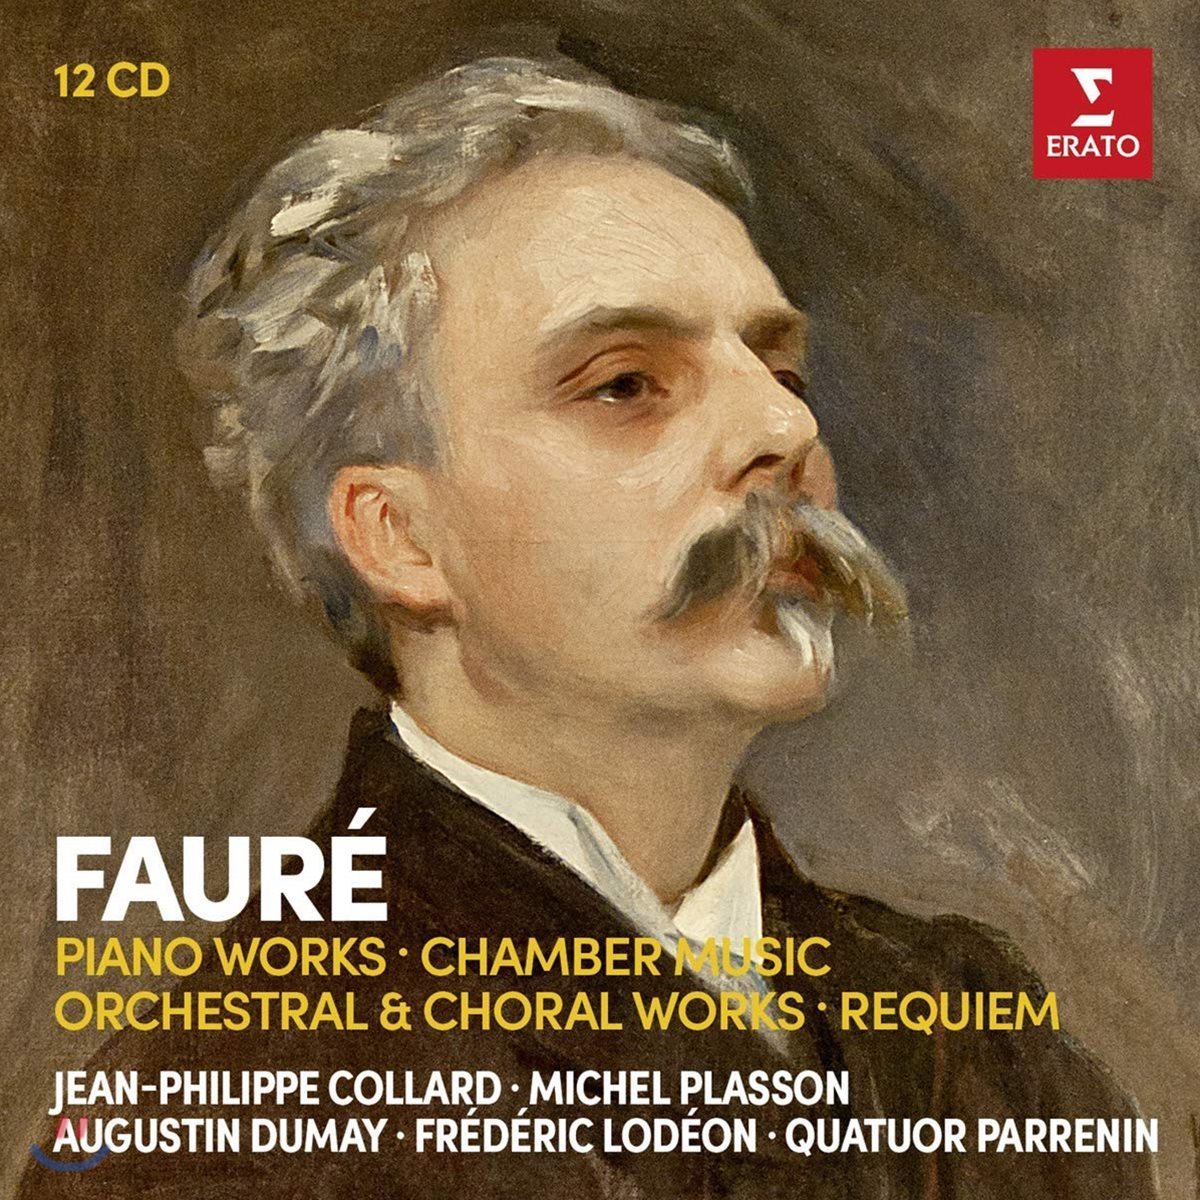 Jean-Philippe Collard / Michel Plasson 포레: 피아노, 실내악, 관현악 &amp; 합창 작품, 레퀴엠 (Faure: Piano Works, Chamber Music, Orchestral &amp; Choral Works, Requiem)